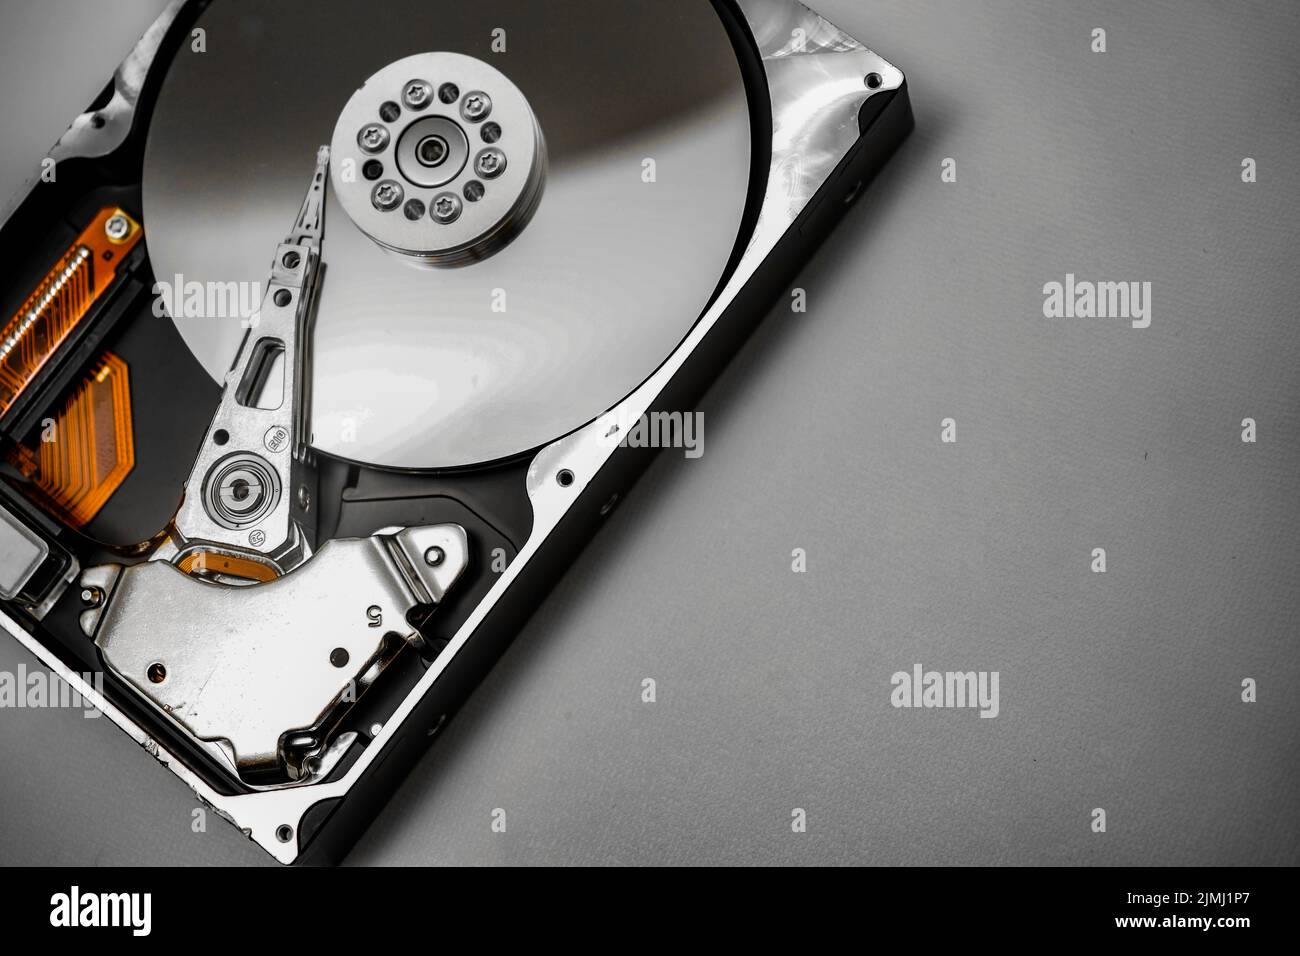 Image of the decomposed hard disk drive Stock Photo